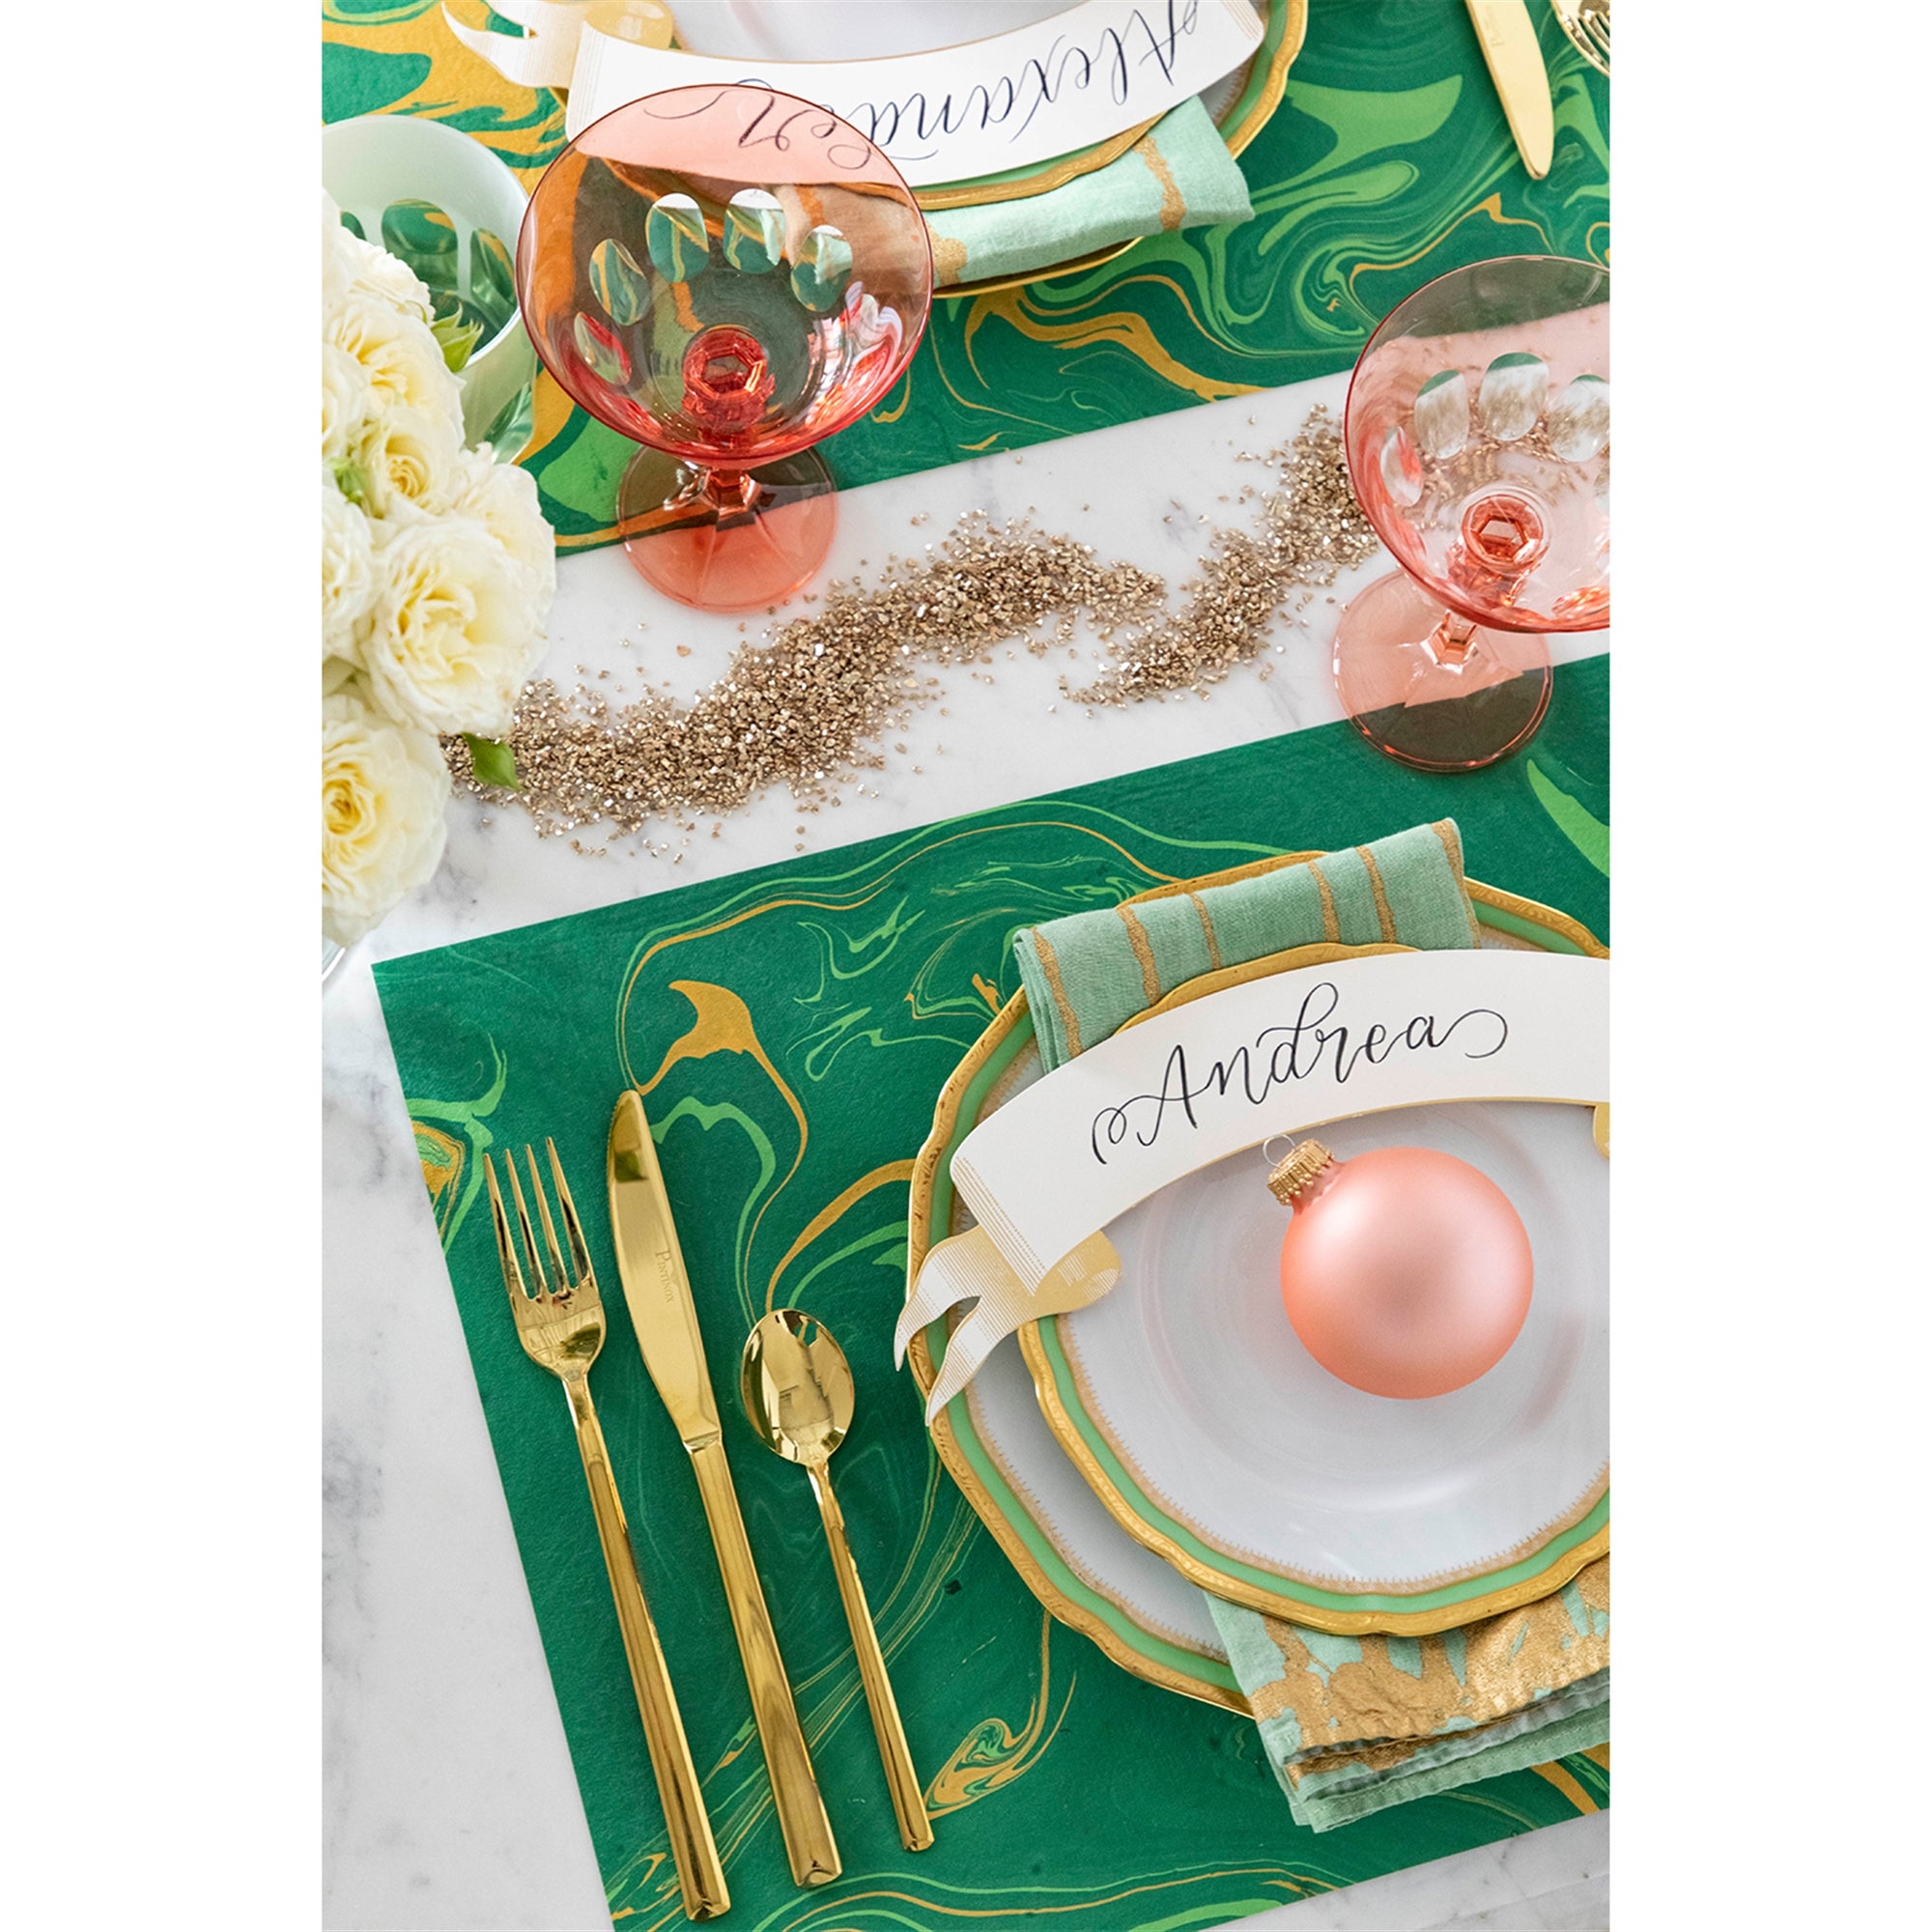 Hester & Cook Green & Gold Veined Marbled Placemats